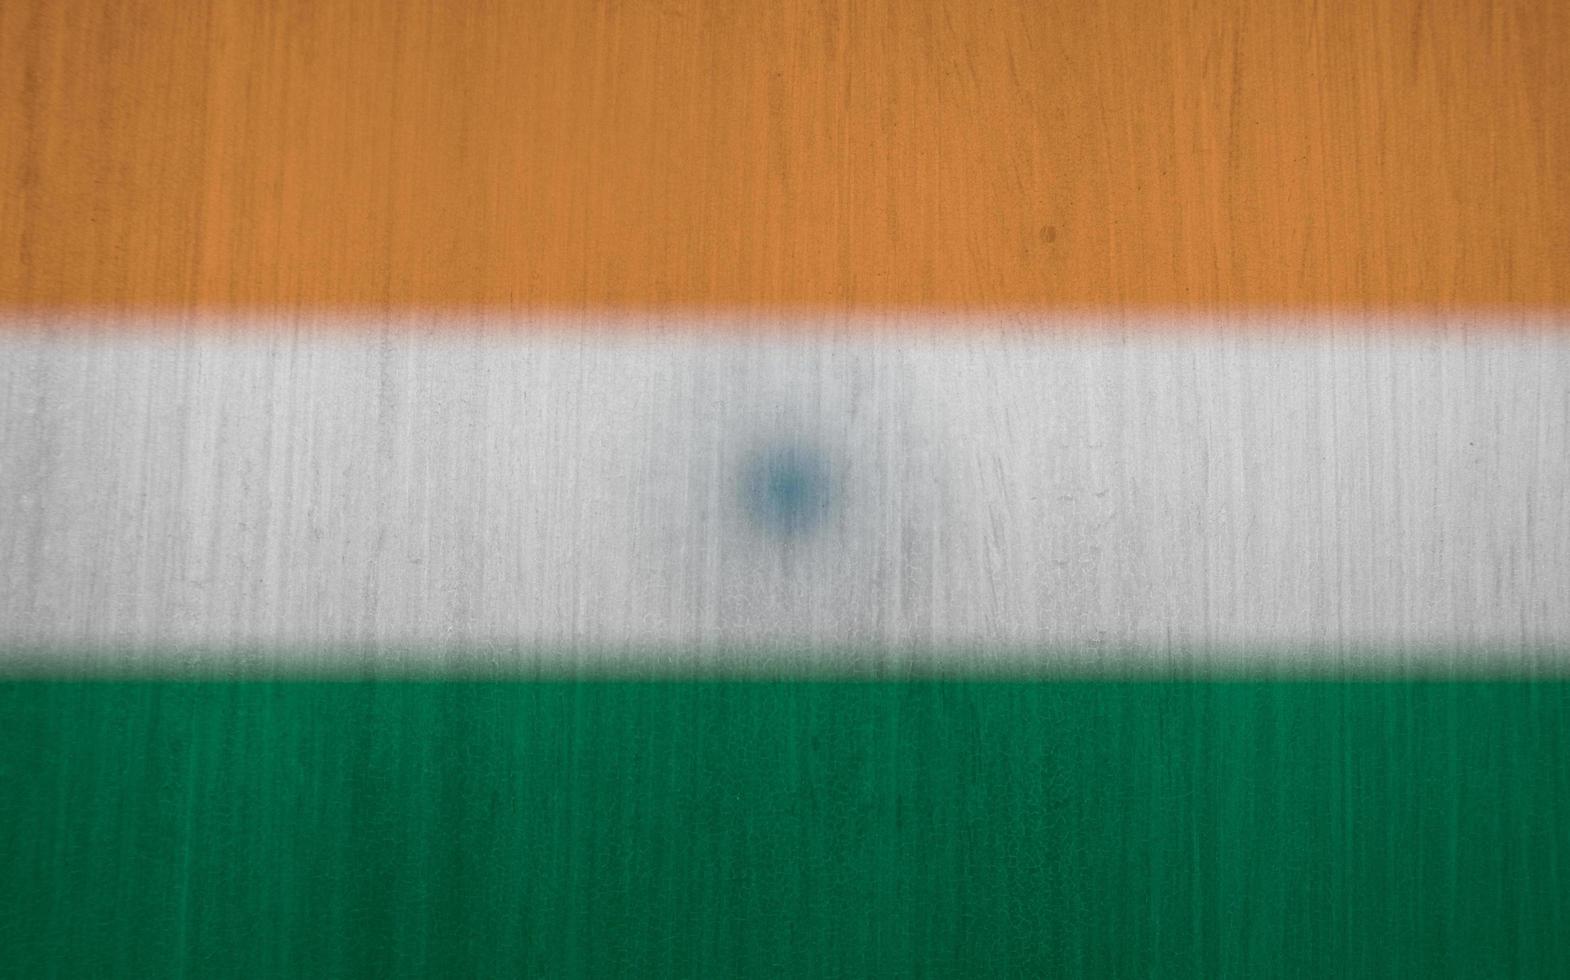 Indian flag texture as a background photo